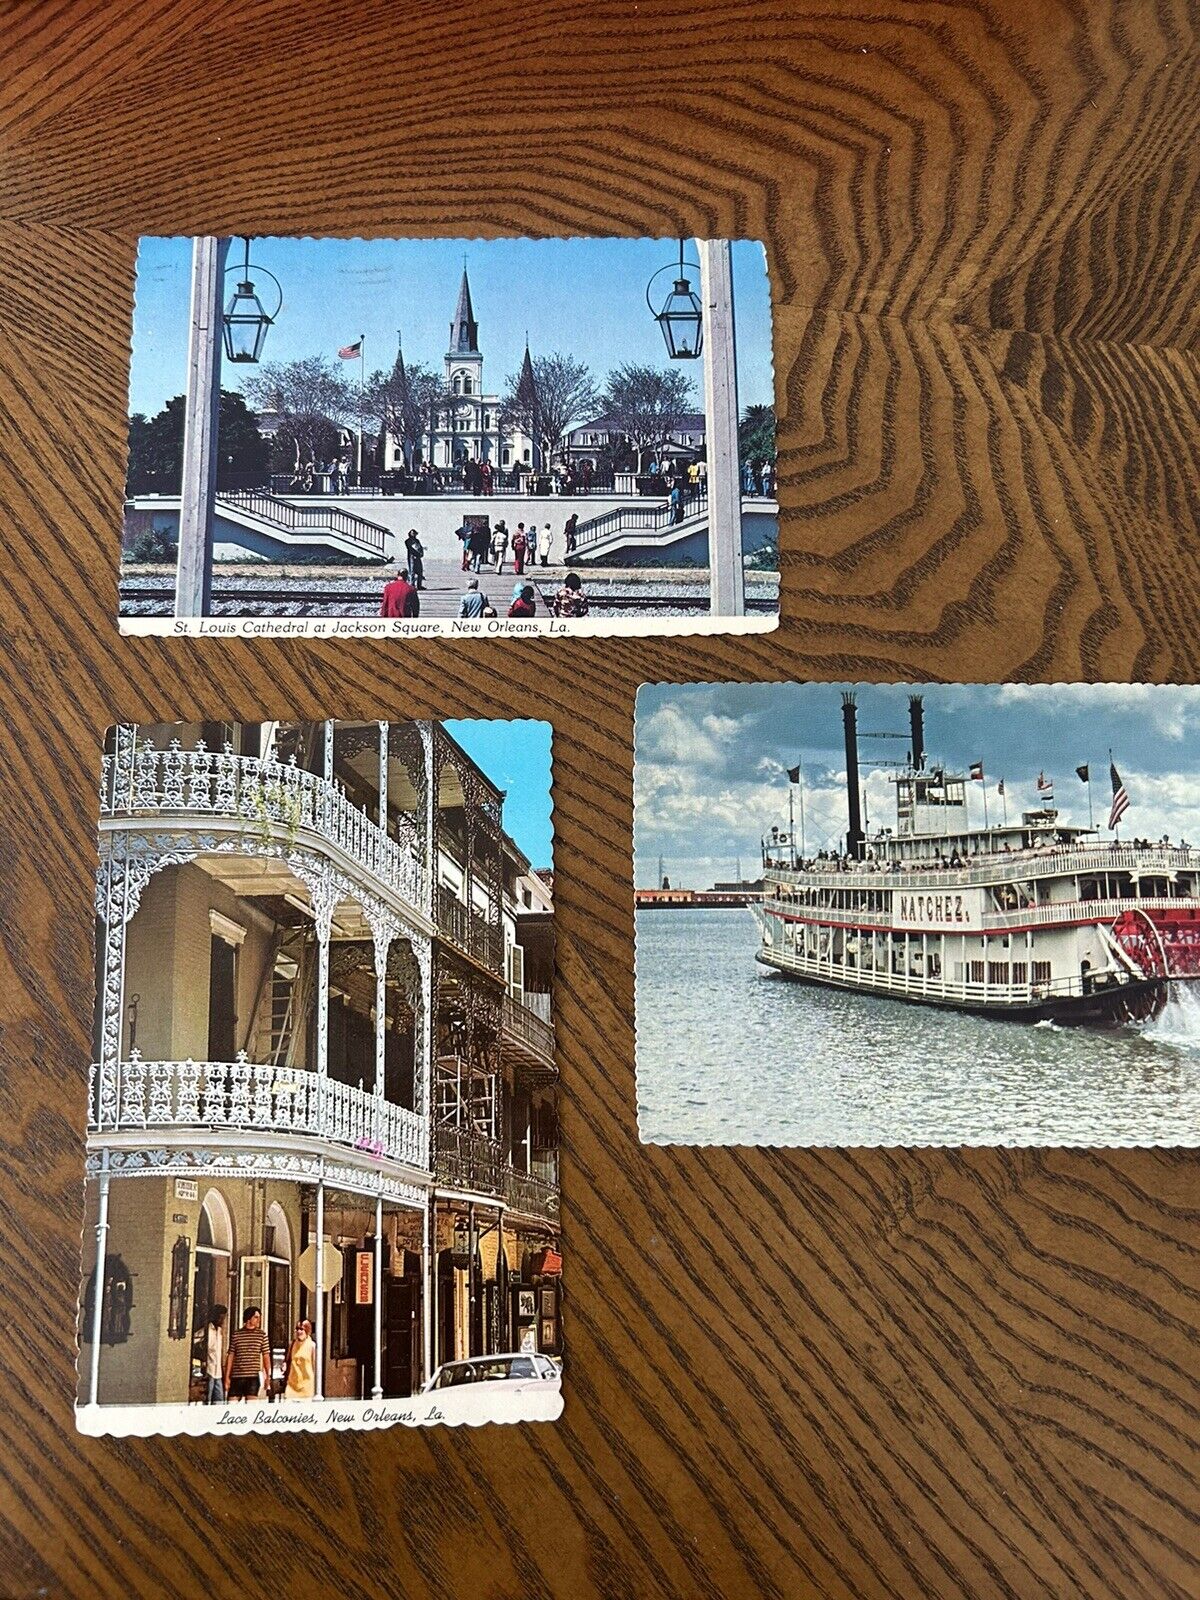 Lot Of 3 Vintage Postcards Of New Orleans, French Quarter, Paddle Boat